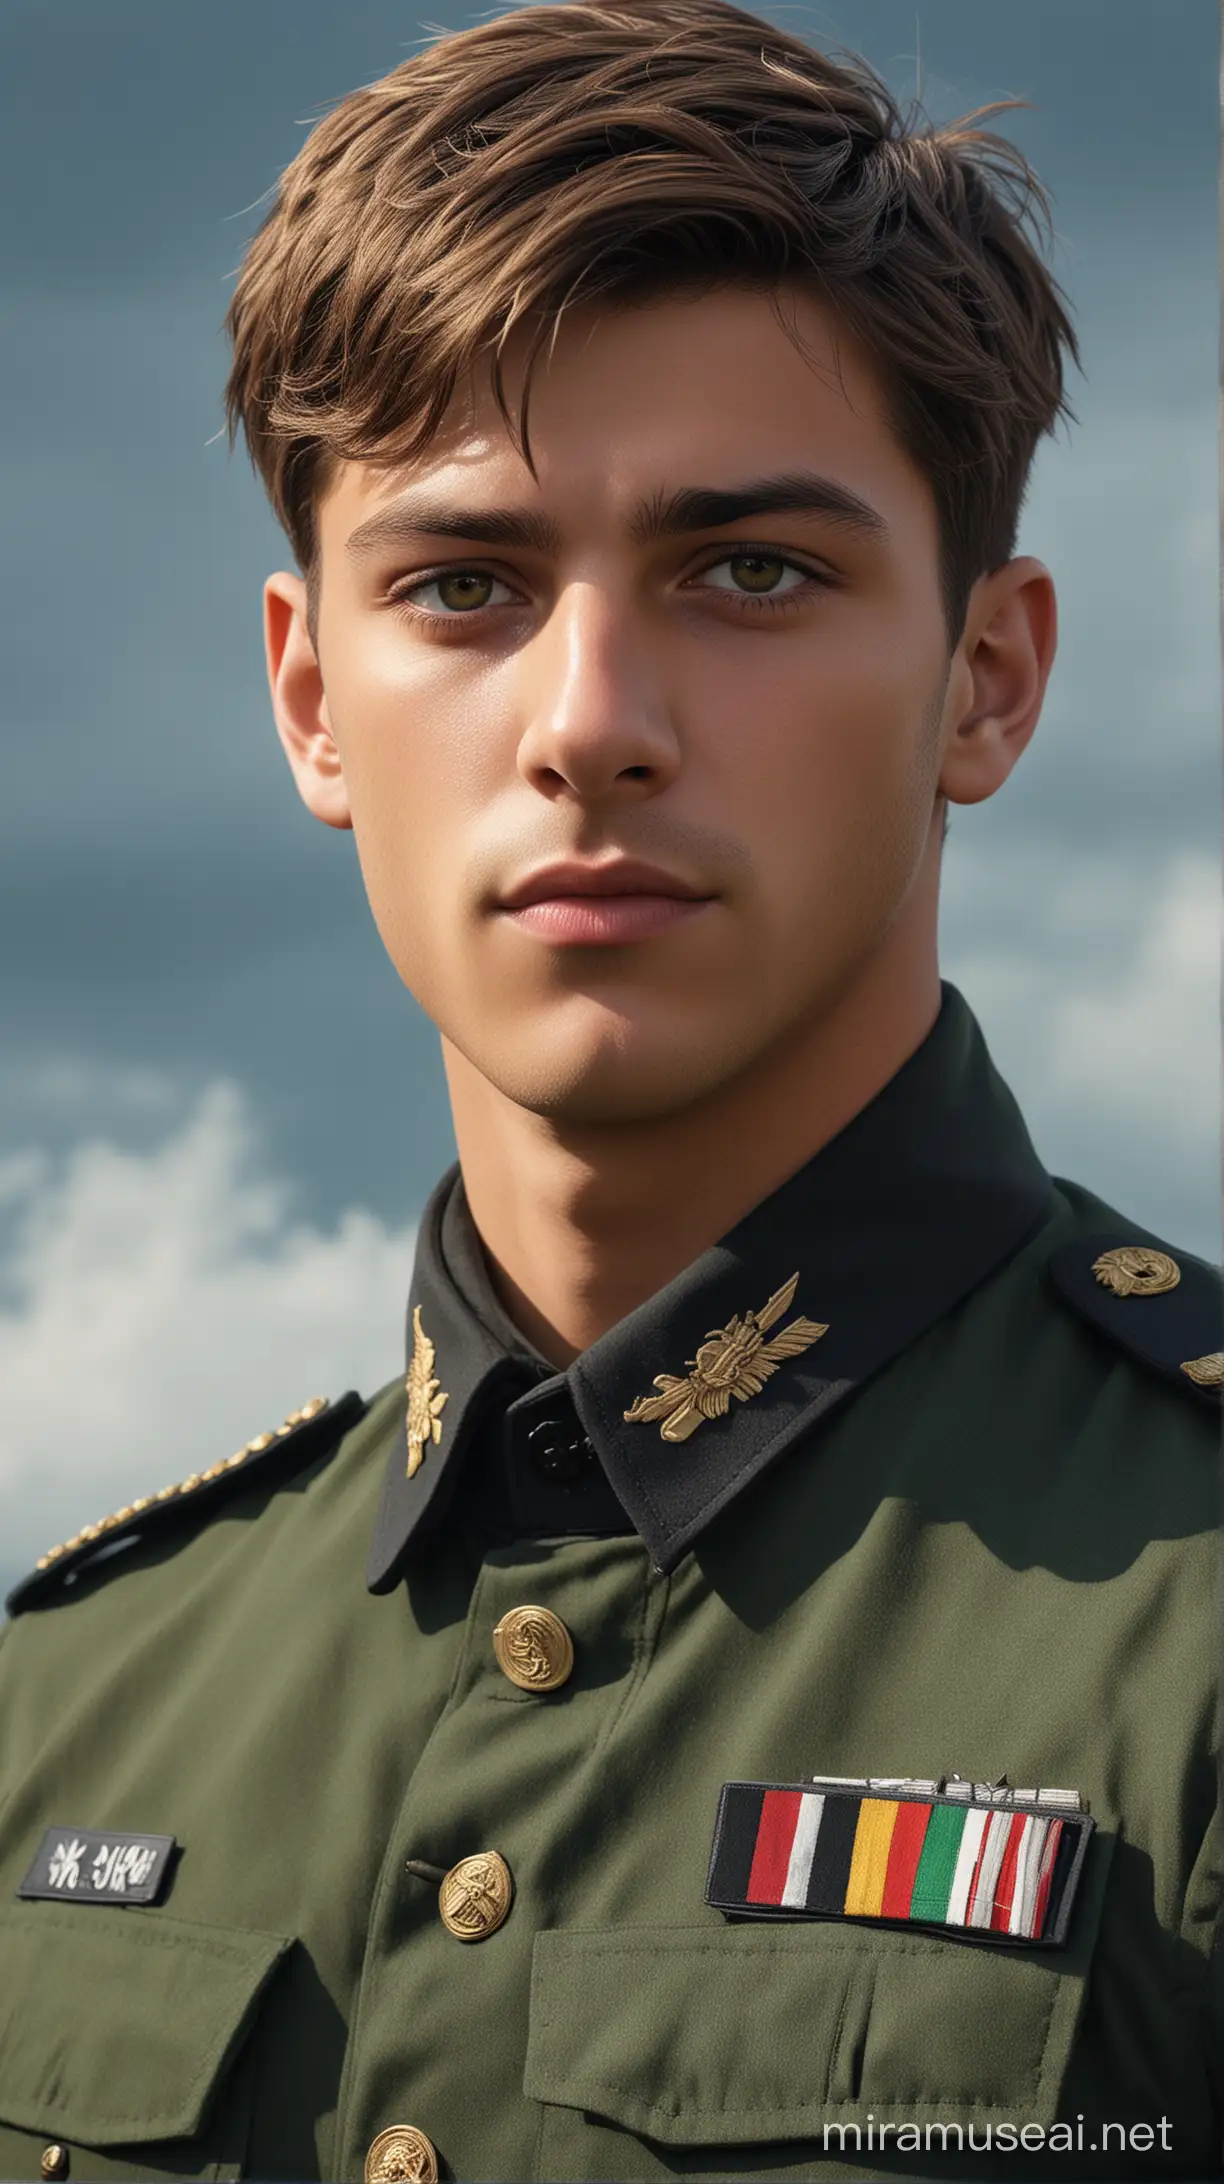 in a sea natural background there are prince Filippo is Germany 21-year-old with short brown  hair and brown eyes and muscled and
military uniform an navy of the Germany  dark green
uniform with camouflage military and prince face beautiful 8k re solution ultra-realistic